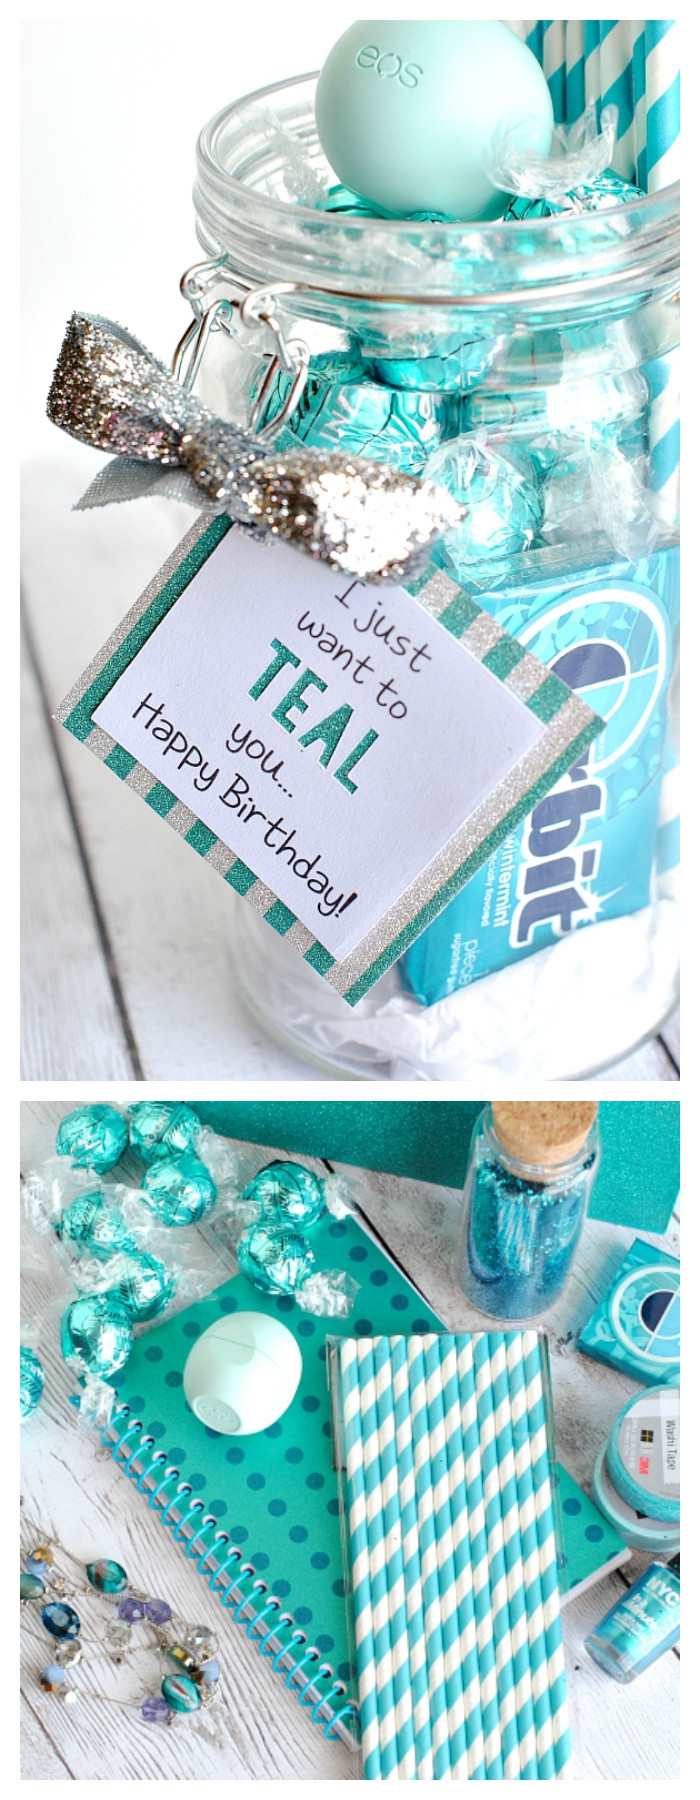 Cute Birthday Gifts
 I Just Want to TEAL You Gift Idea for Friend Crazy